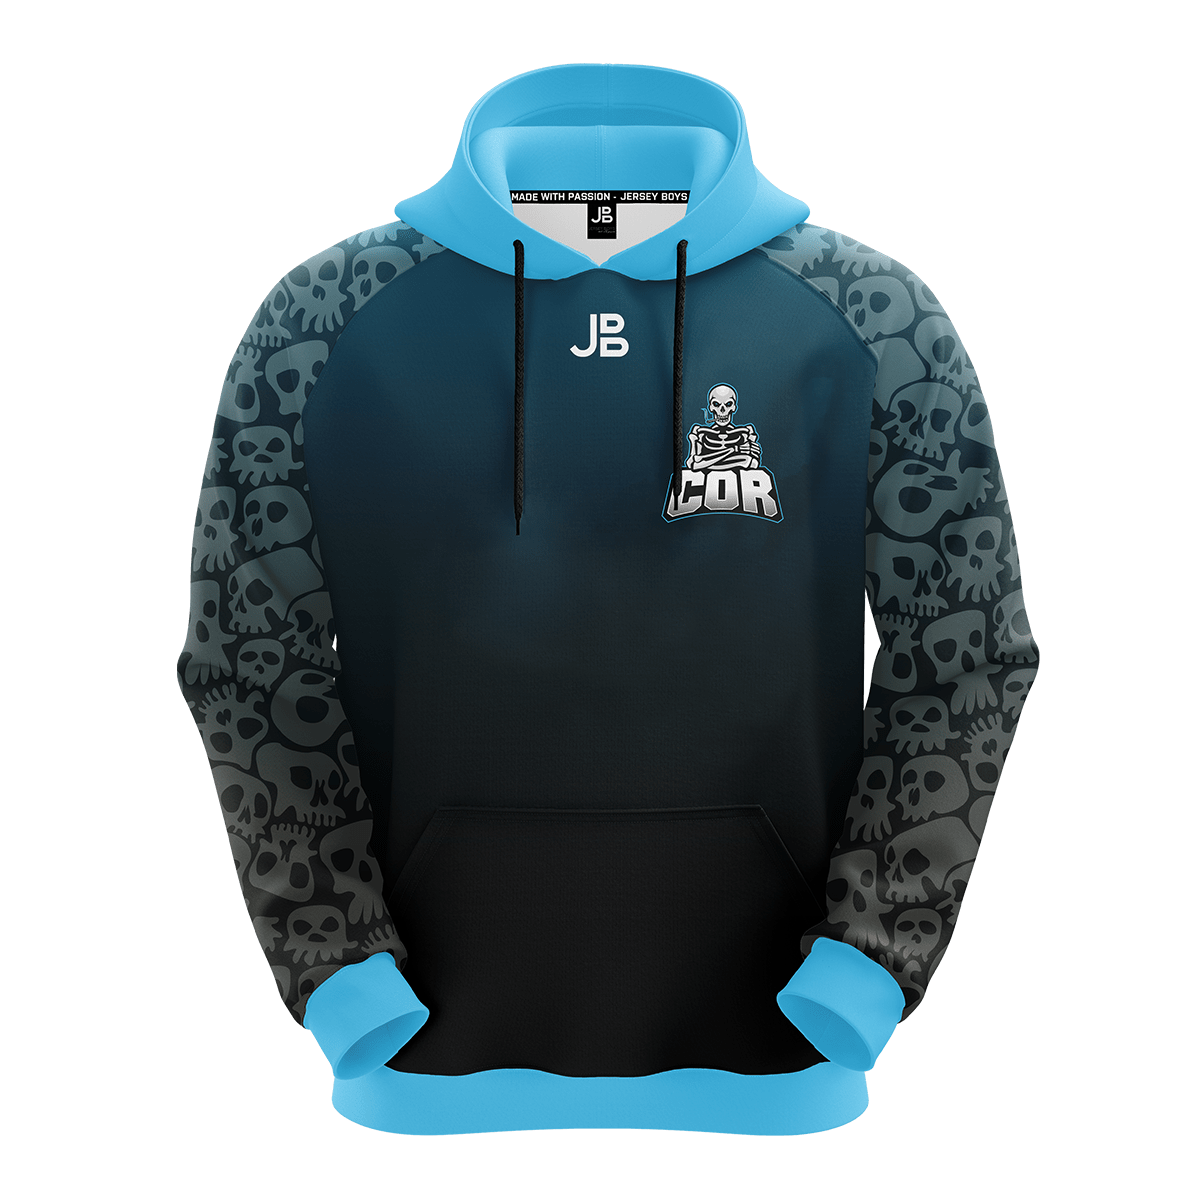 CRY OF REDEMPTION - Crew Hoodie 2020